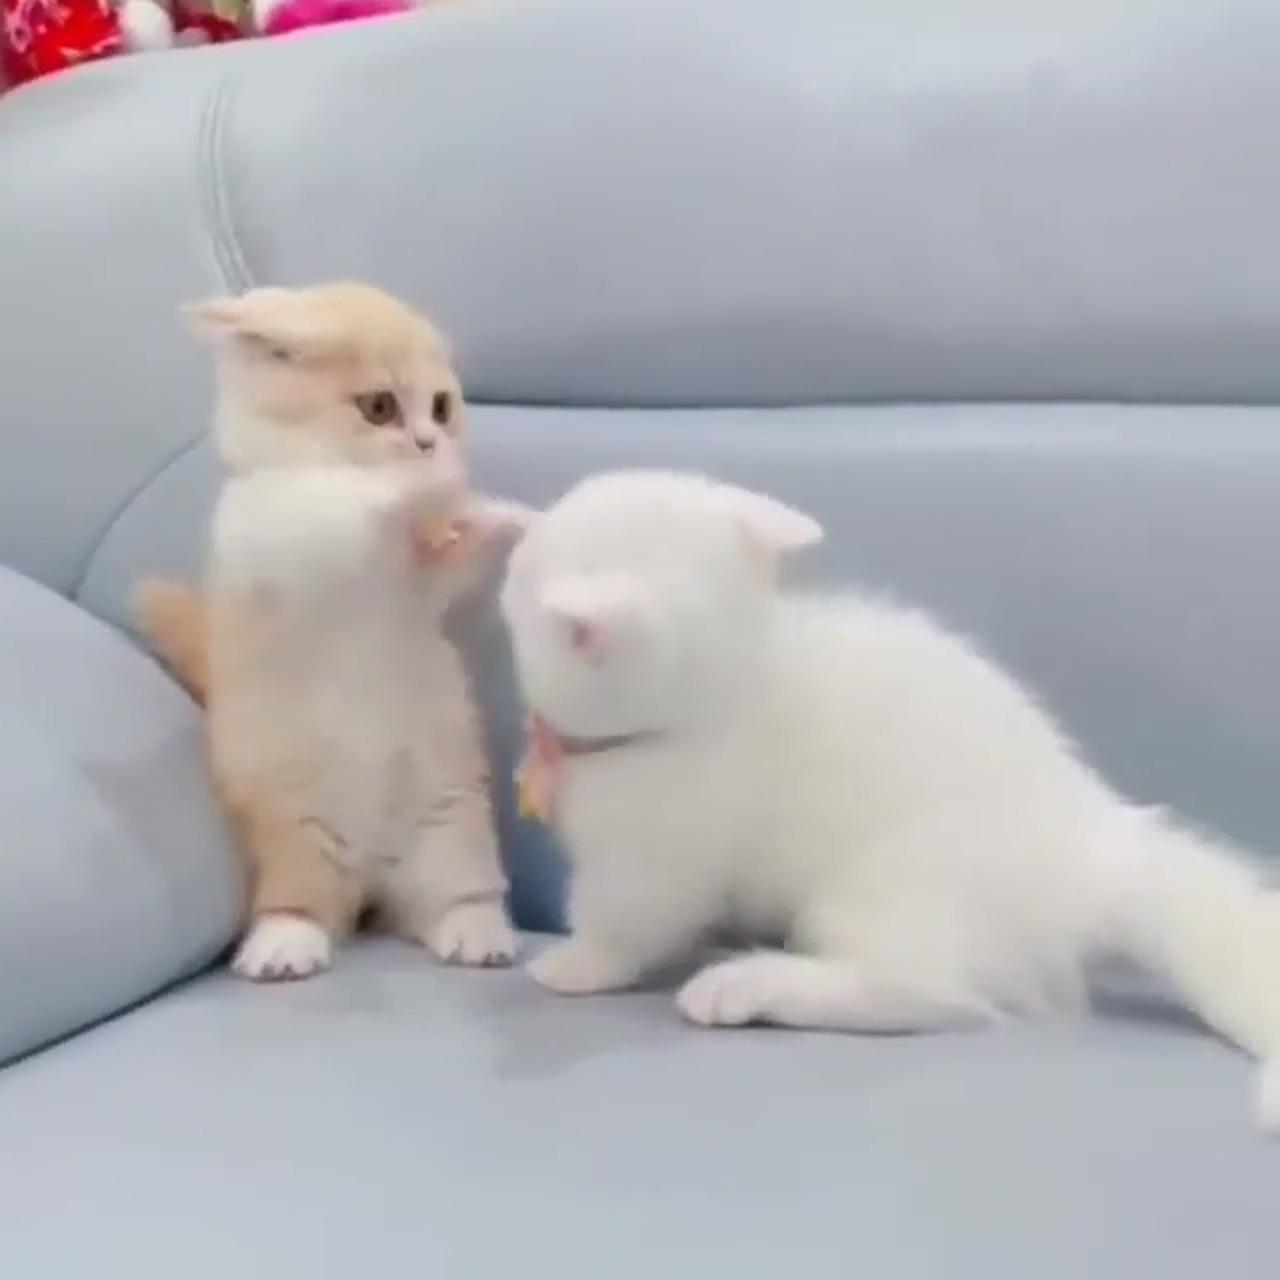 Cutest fight ever; small kittens